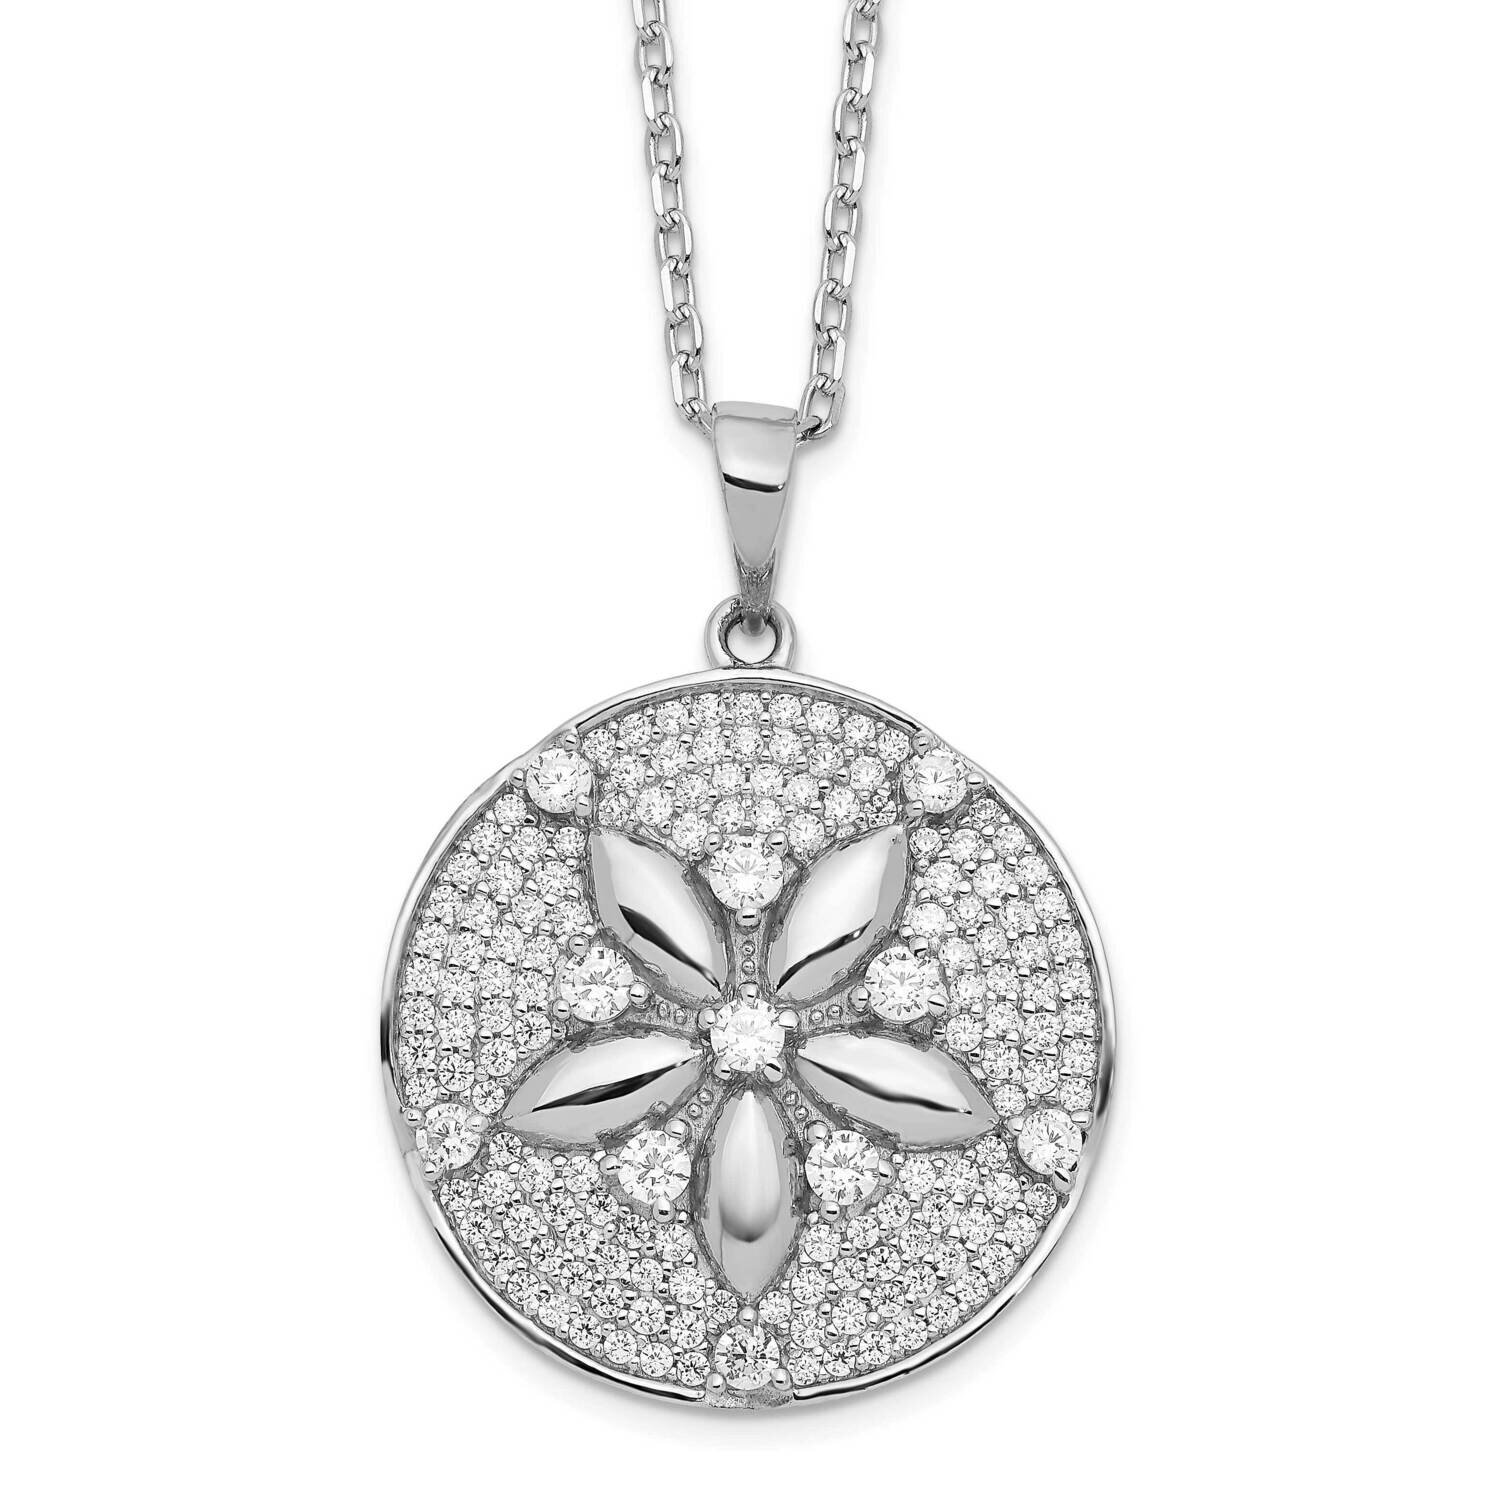 Cheryl M CZ Diamond with 2 Inch Ext. Sand Dollar Necklace Sterling Silver Rhodium-plated QCM1547-16